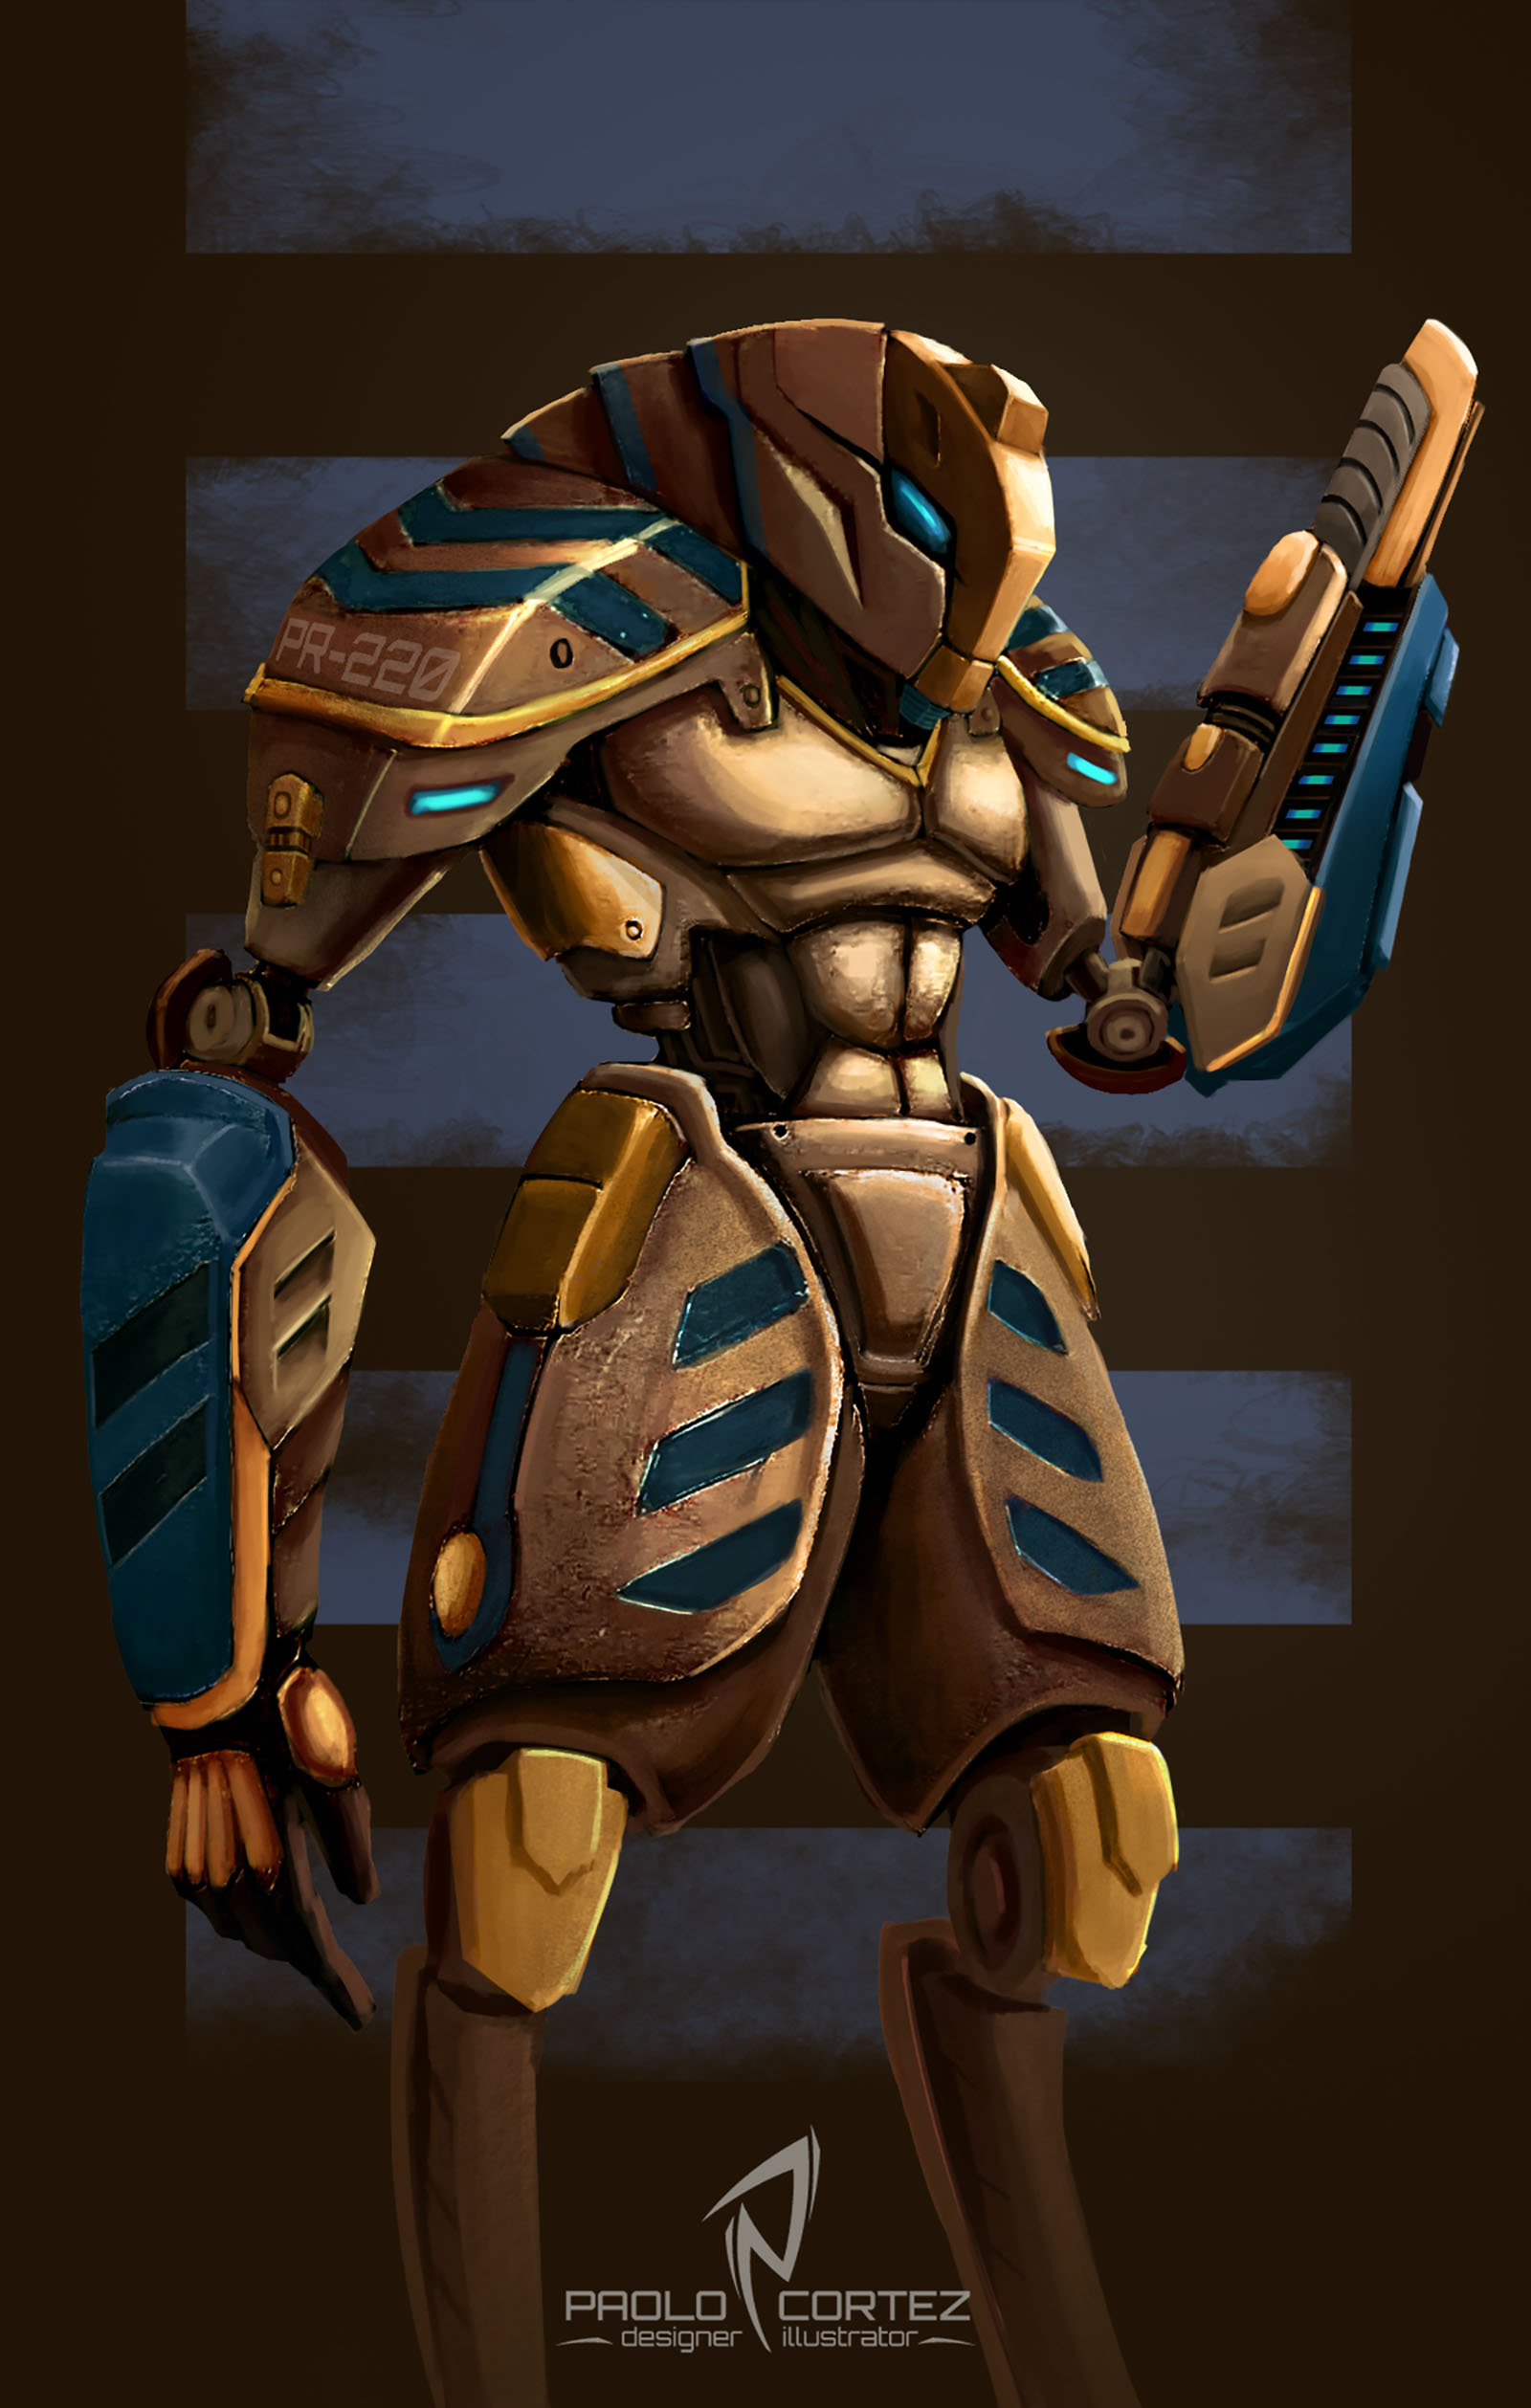 Egyptian Sci Fi Soldier Character Design
  
  <p>CONCEPT:  Design a Robot cop that patrols floating cities for comic book story</p>
  <p>HOW DESIGN SOLVES PROBLEMS,: I used recognizable reference to help the robot look like a police bot: traffic camera for head, blue/red lights on shoulders. </p>
  <p>PROCESS: research, digital sketching, and refining</p>
  <p>TOOLS USED: Photoshop</p>
  <p>CHALLENGES: Keeping the design interesting and understandable, yet simple enough so redrawing the character in comic book won't be too difficult.</p>
  